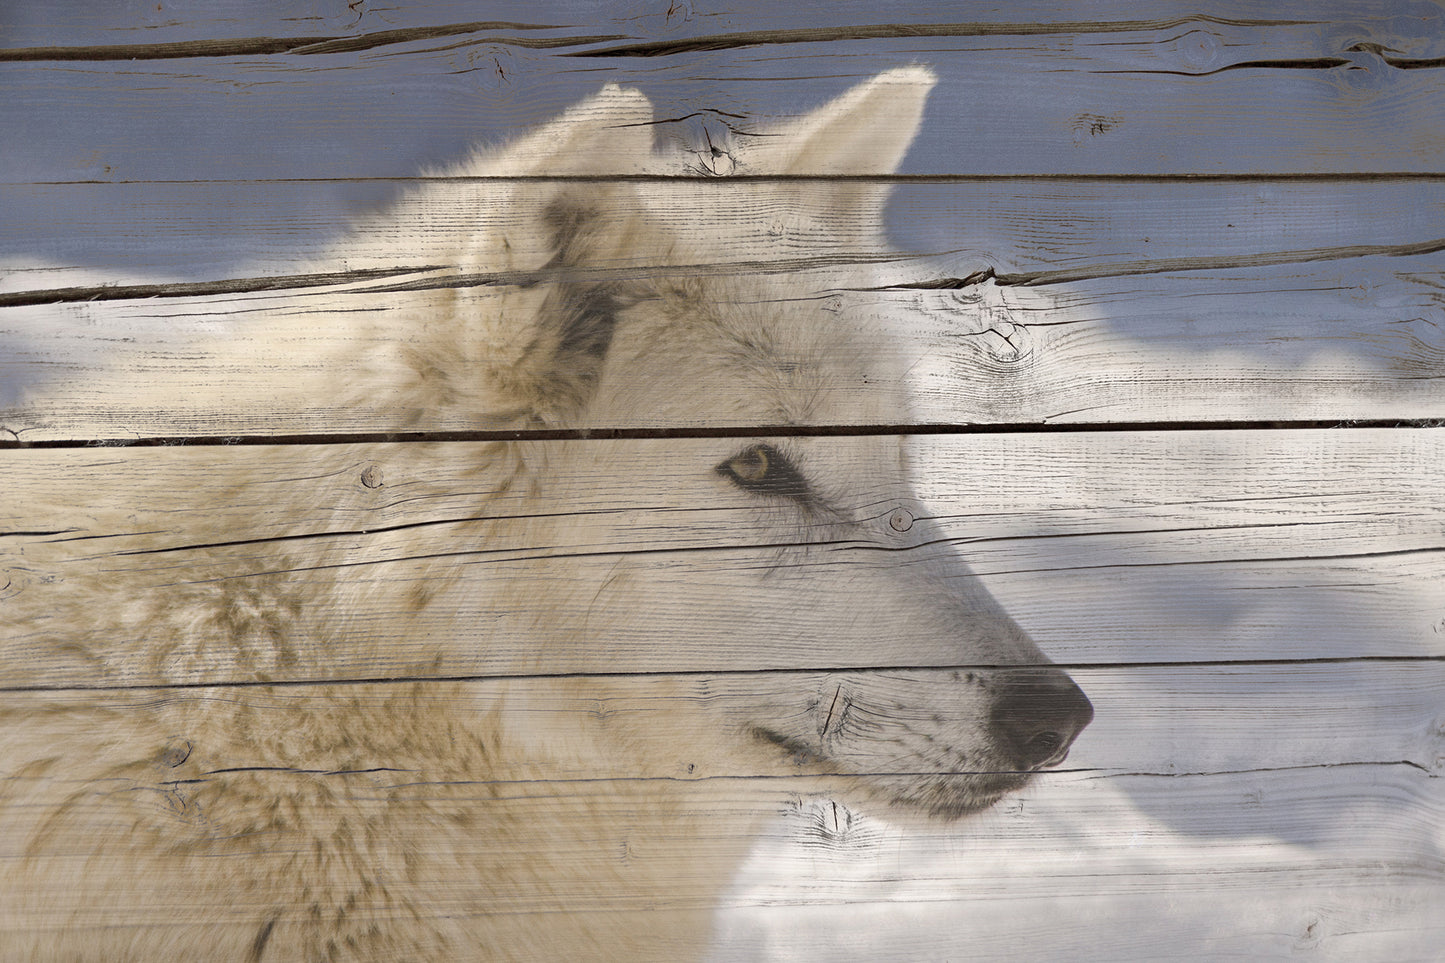 Trendy Wall Prints: Aries the White Wolf Portrait on Faux Weathered Wood Texture - Farmhouse / Country Style / Modern Wildlife / Animal Photographic Artwork